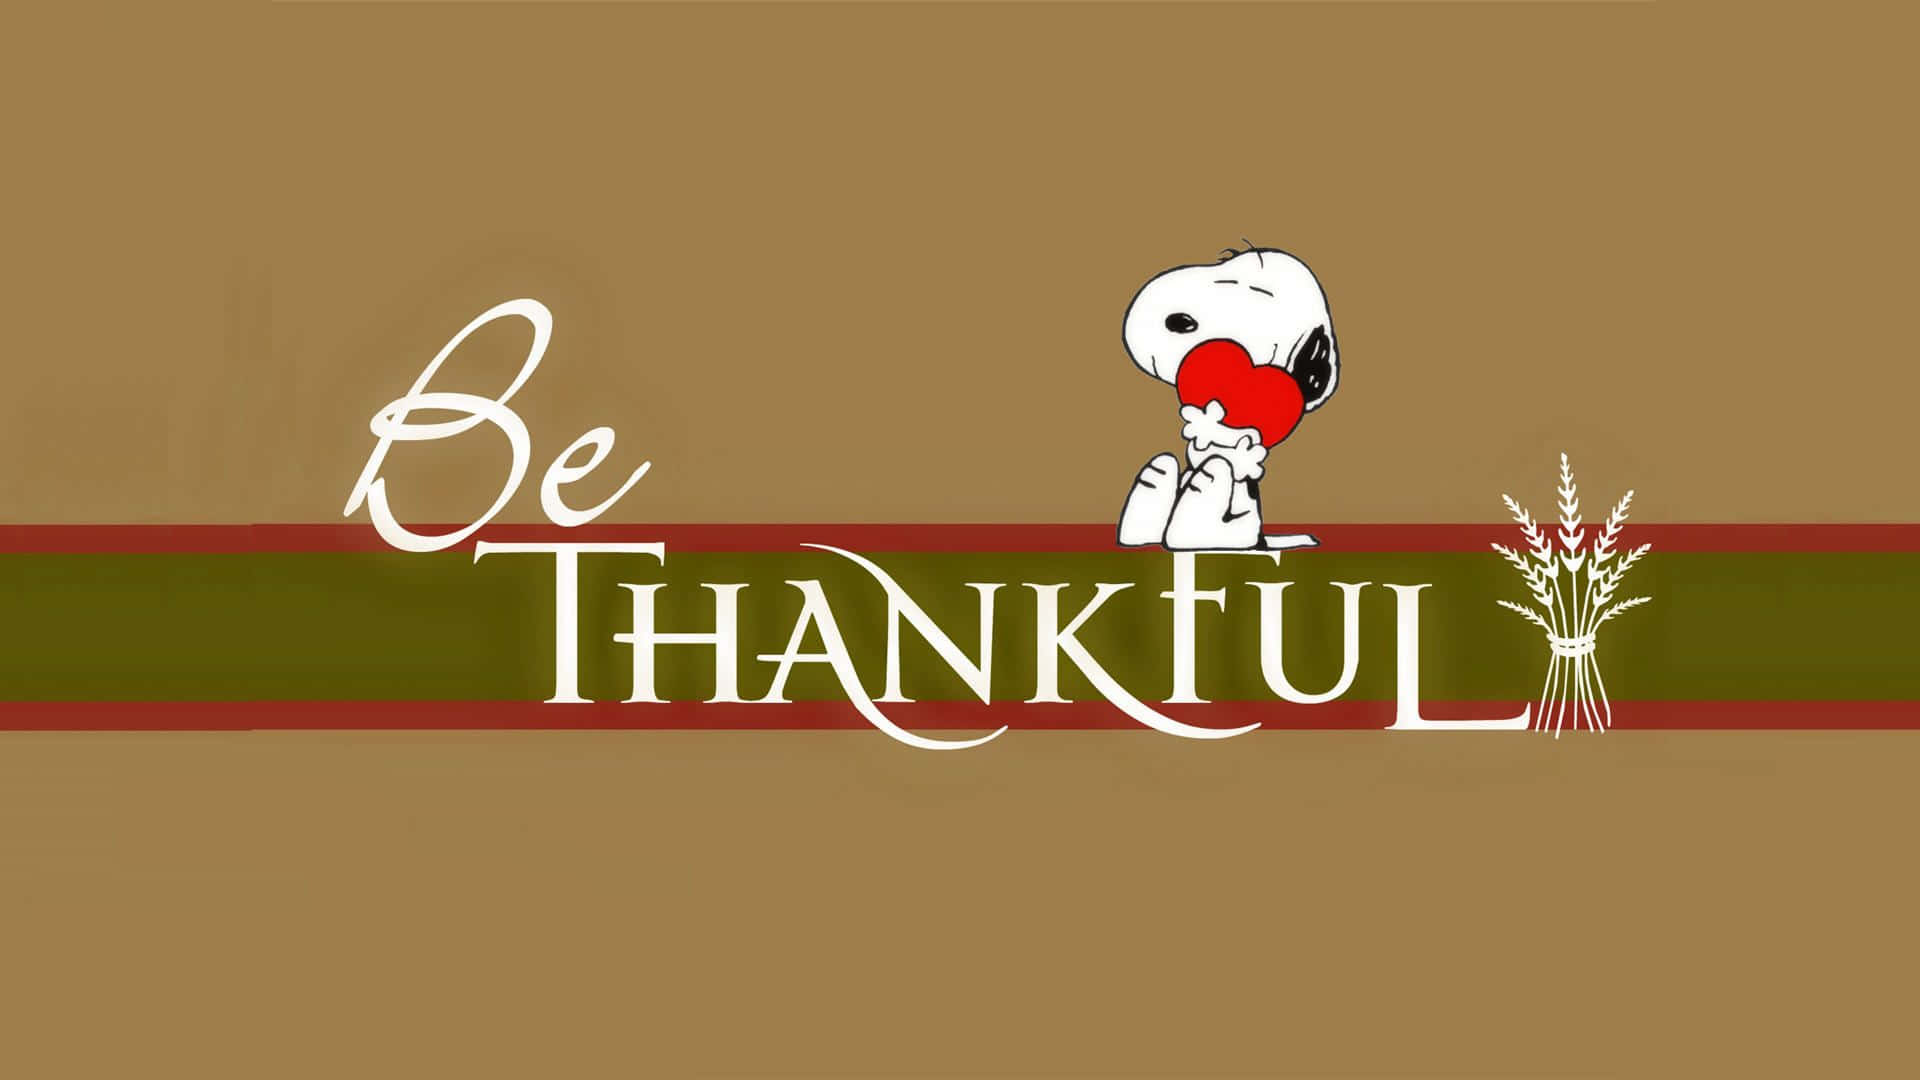 Snoopy celebrates Thanksgiving with Charlie Brown Wallpaper